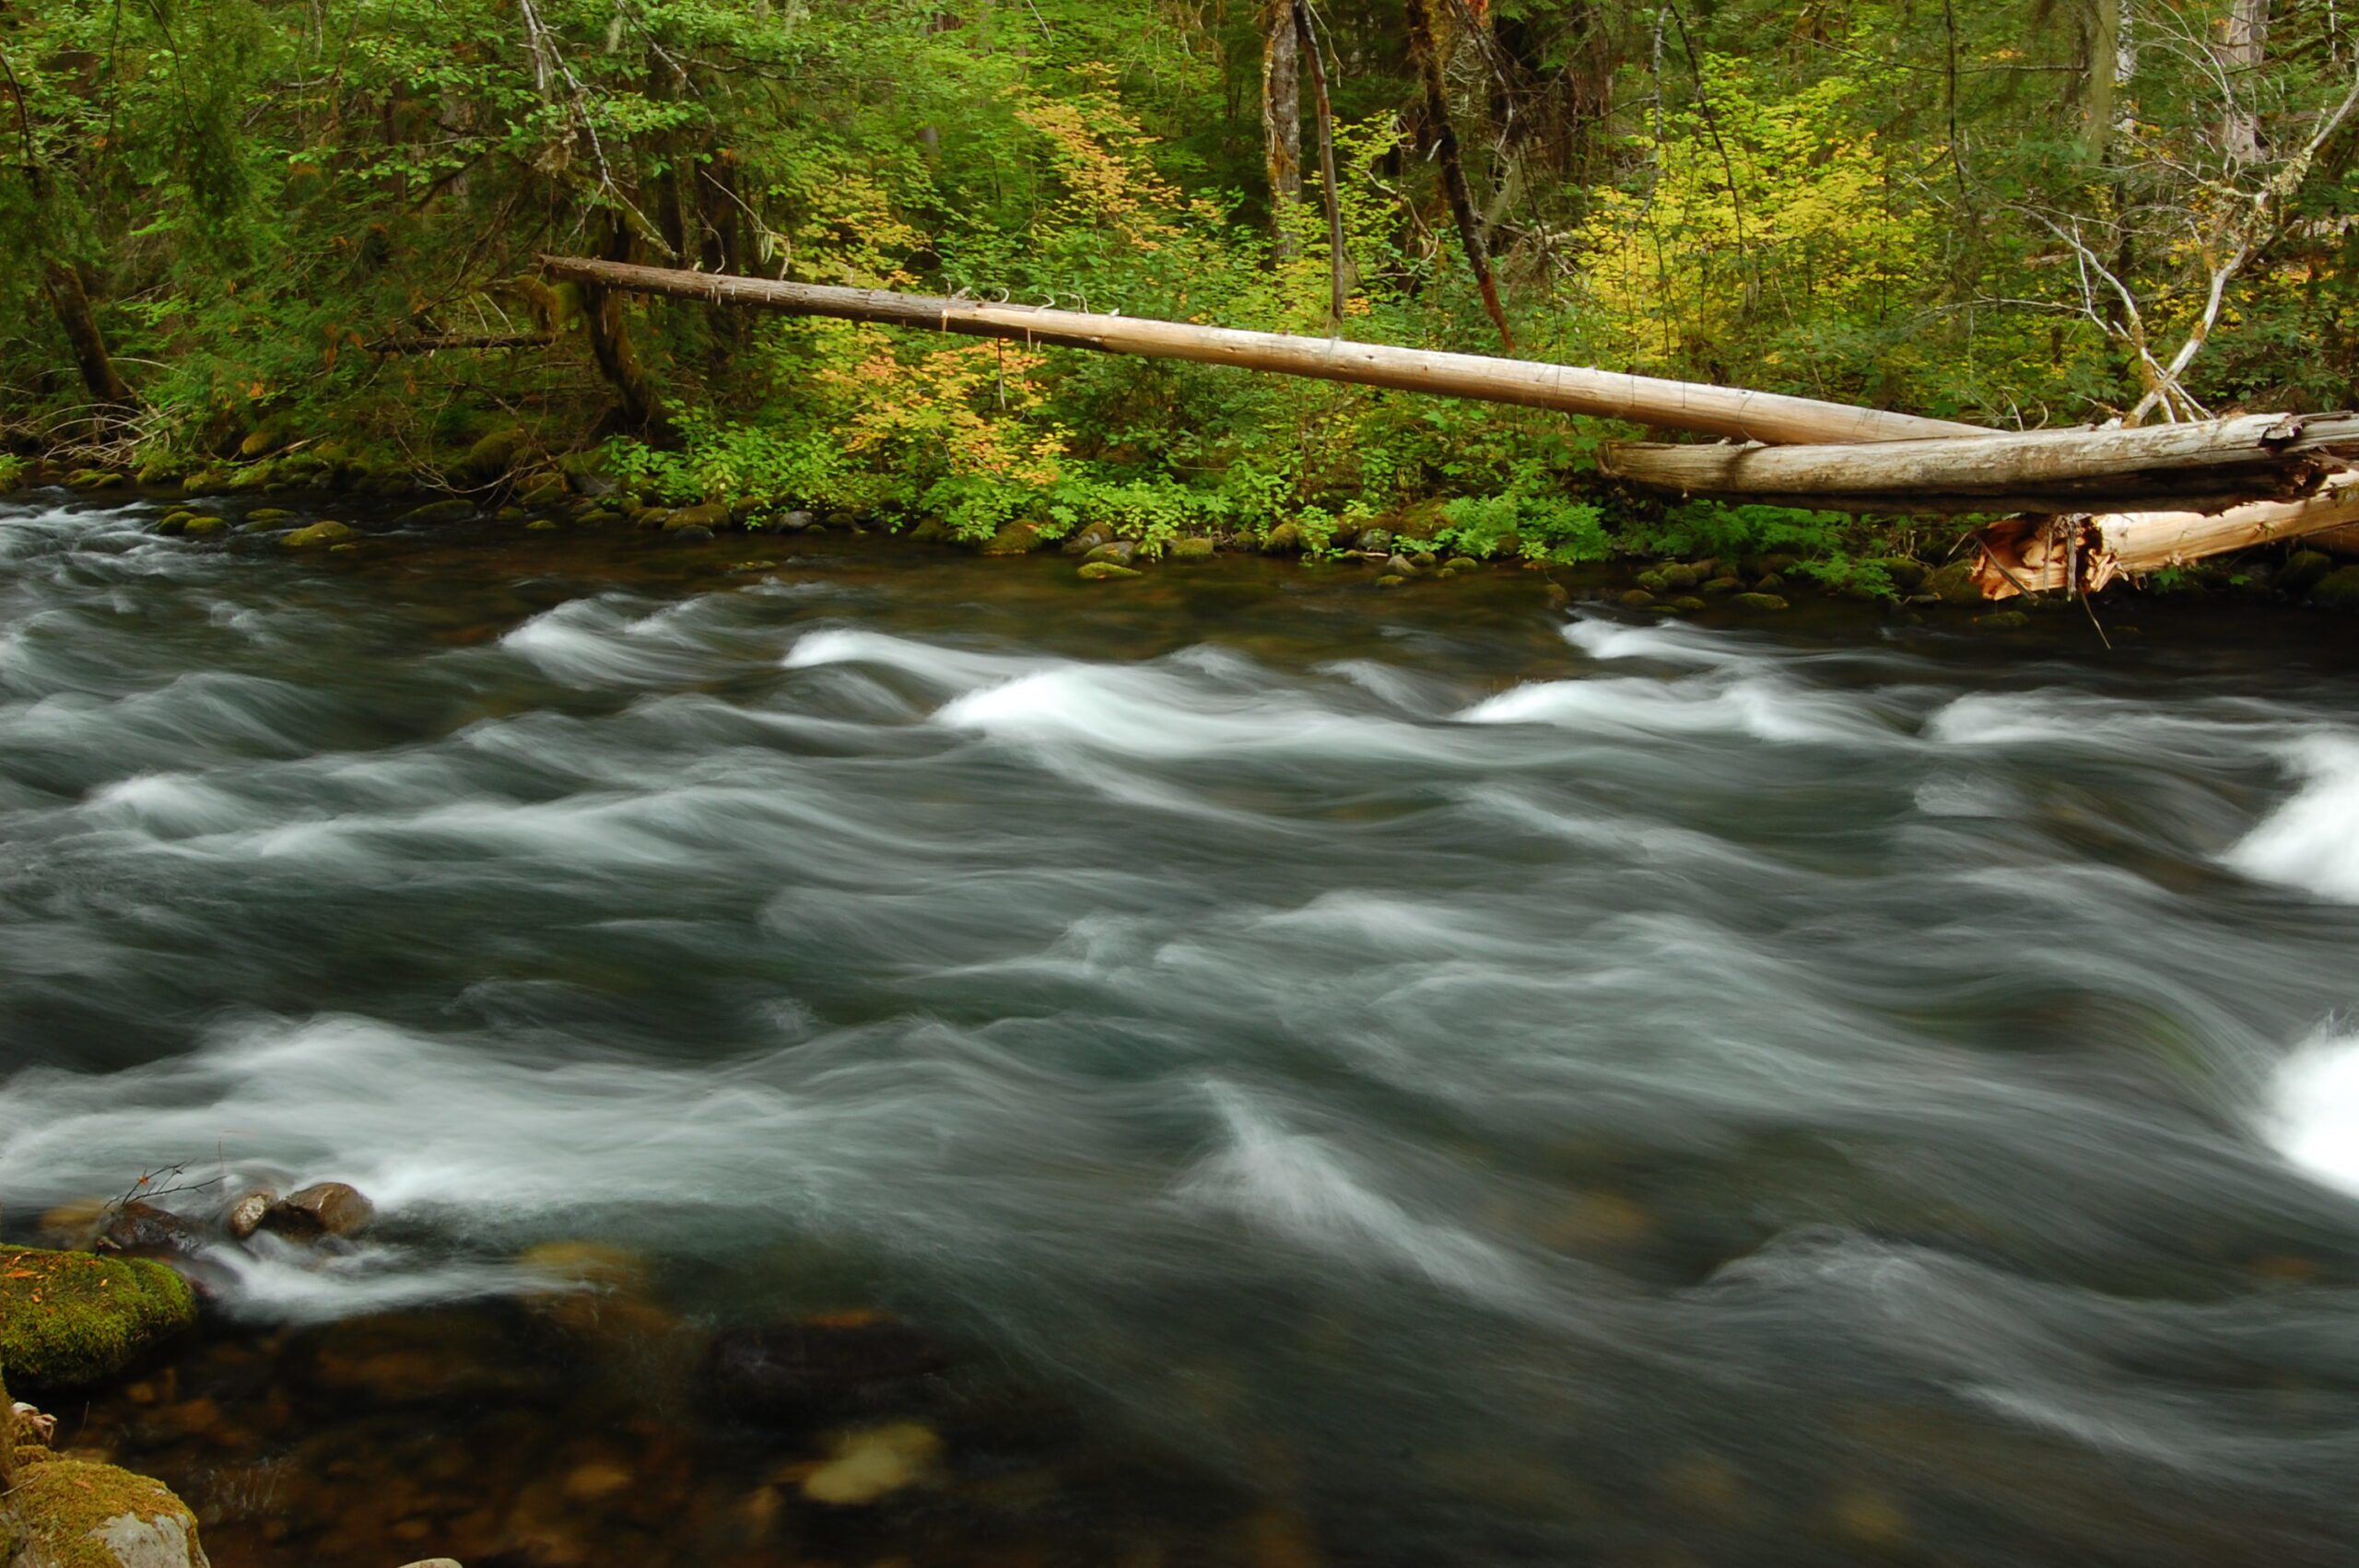 A rushing river with trees in the background